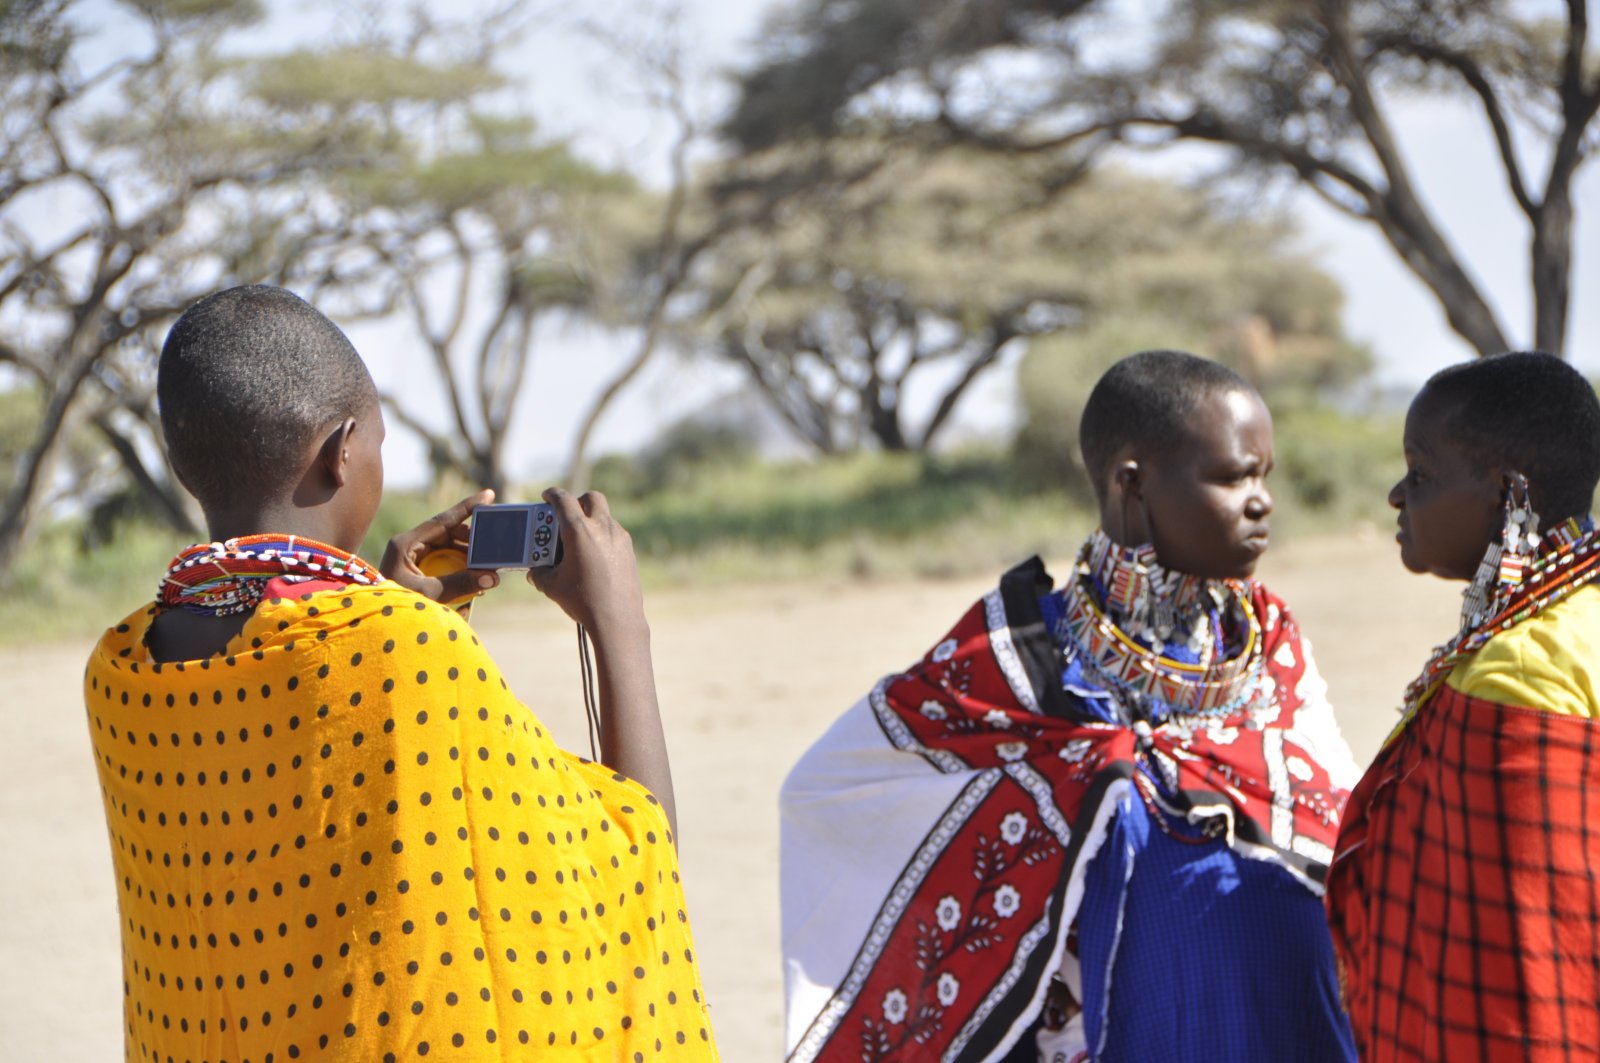 Ngamama Leiyaro, one of our students in Amboseli captures a moment of her friends engrossed in a conversation